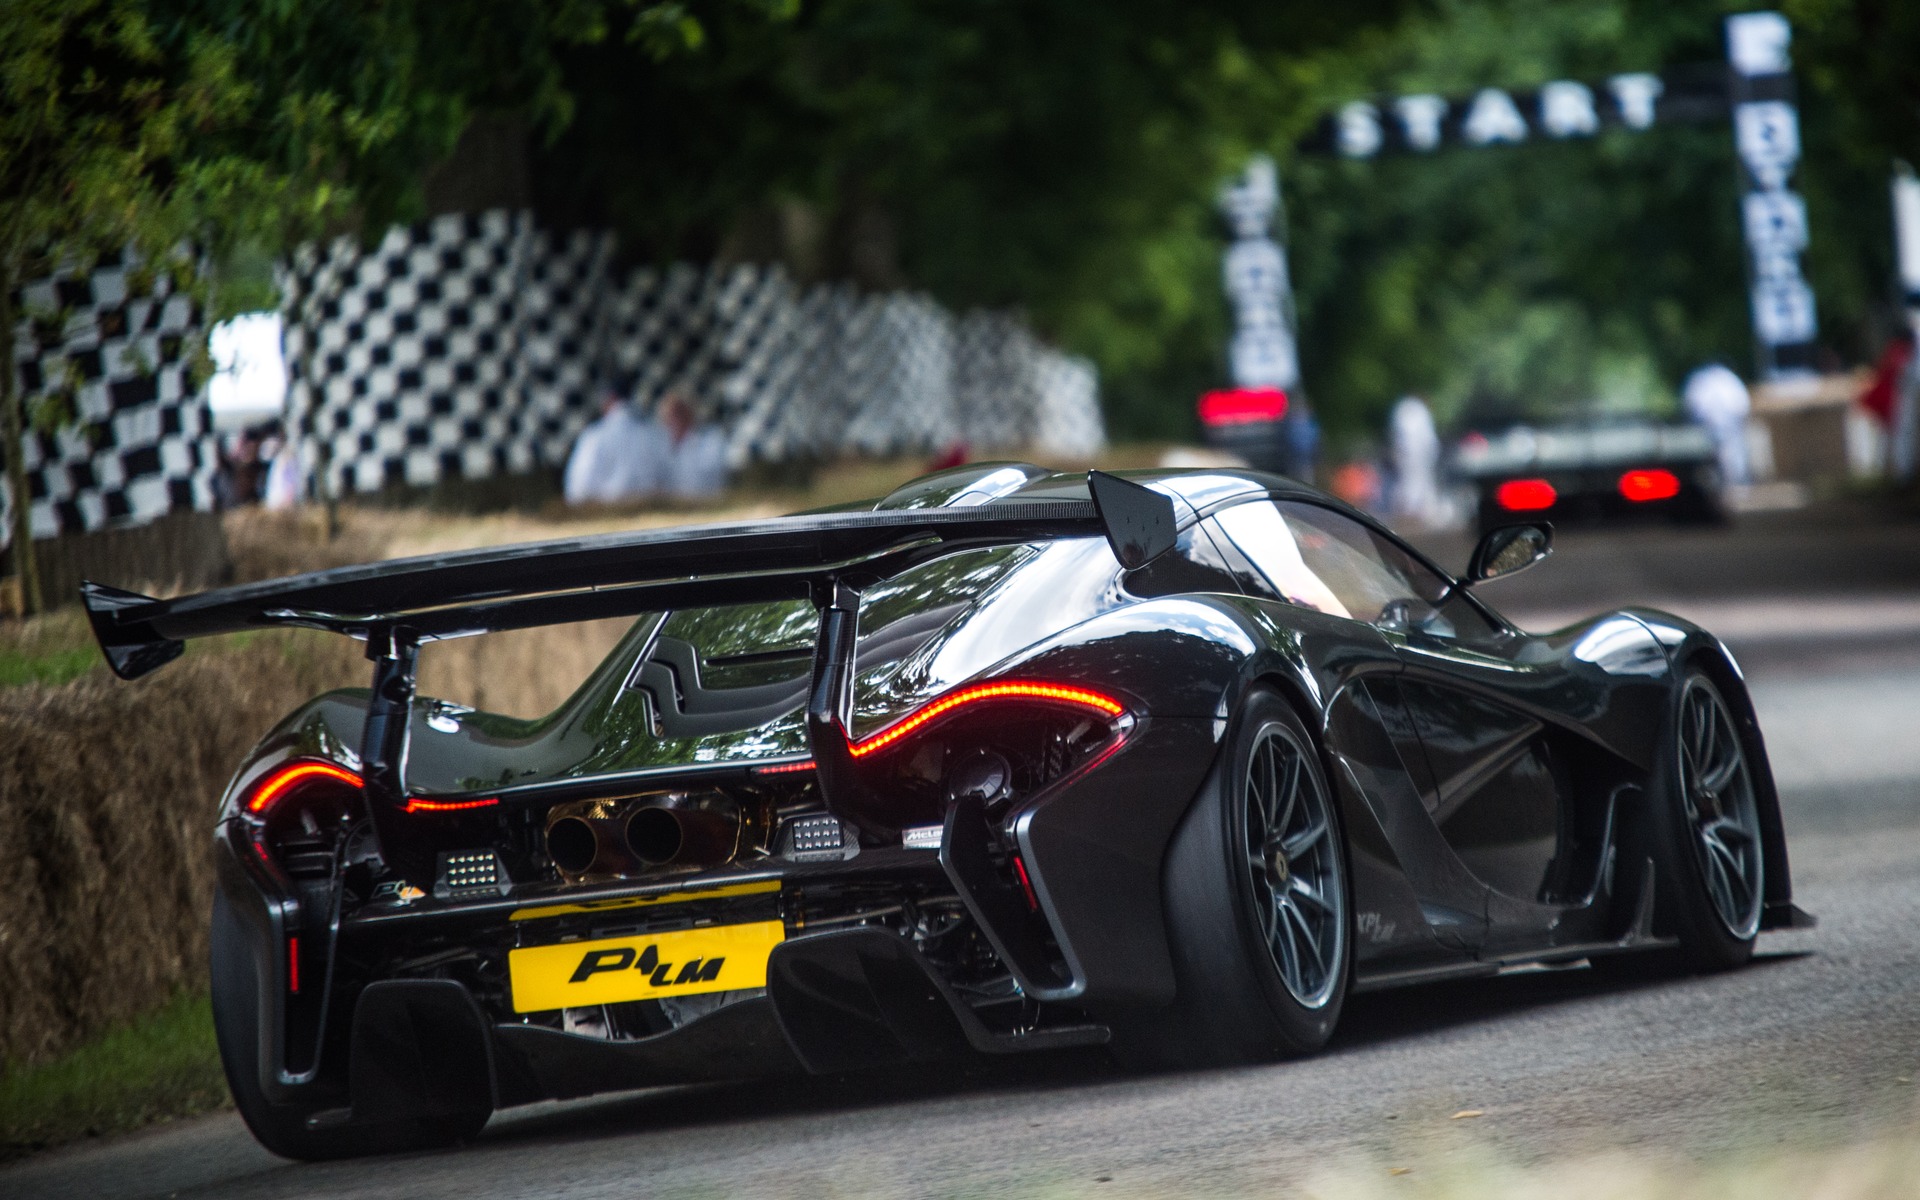 McLaren P1 LM in action at the Festival of Speed 2016